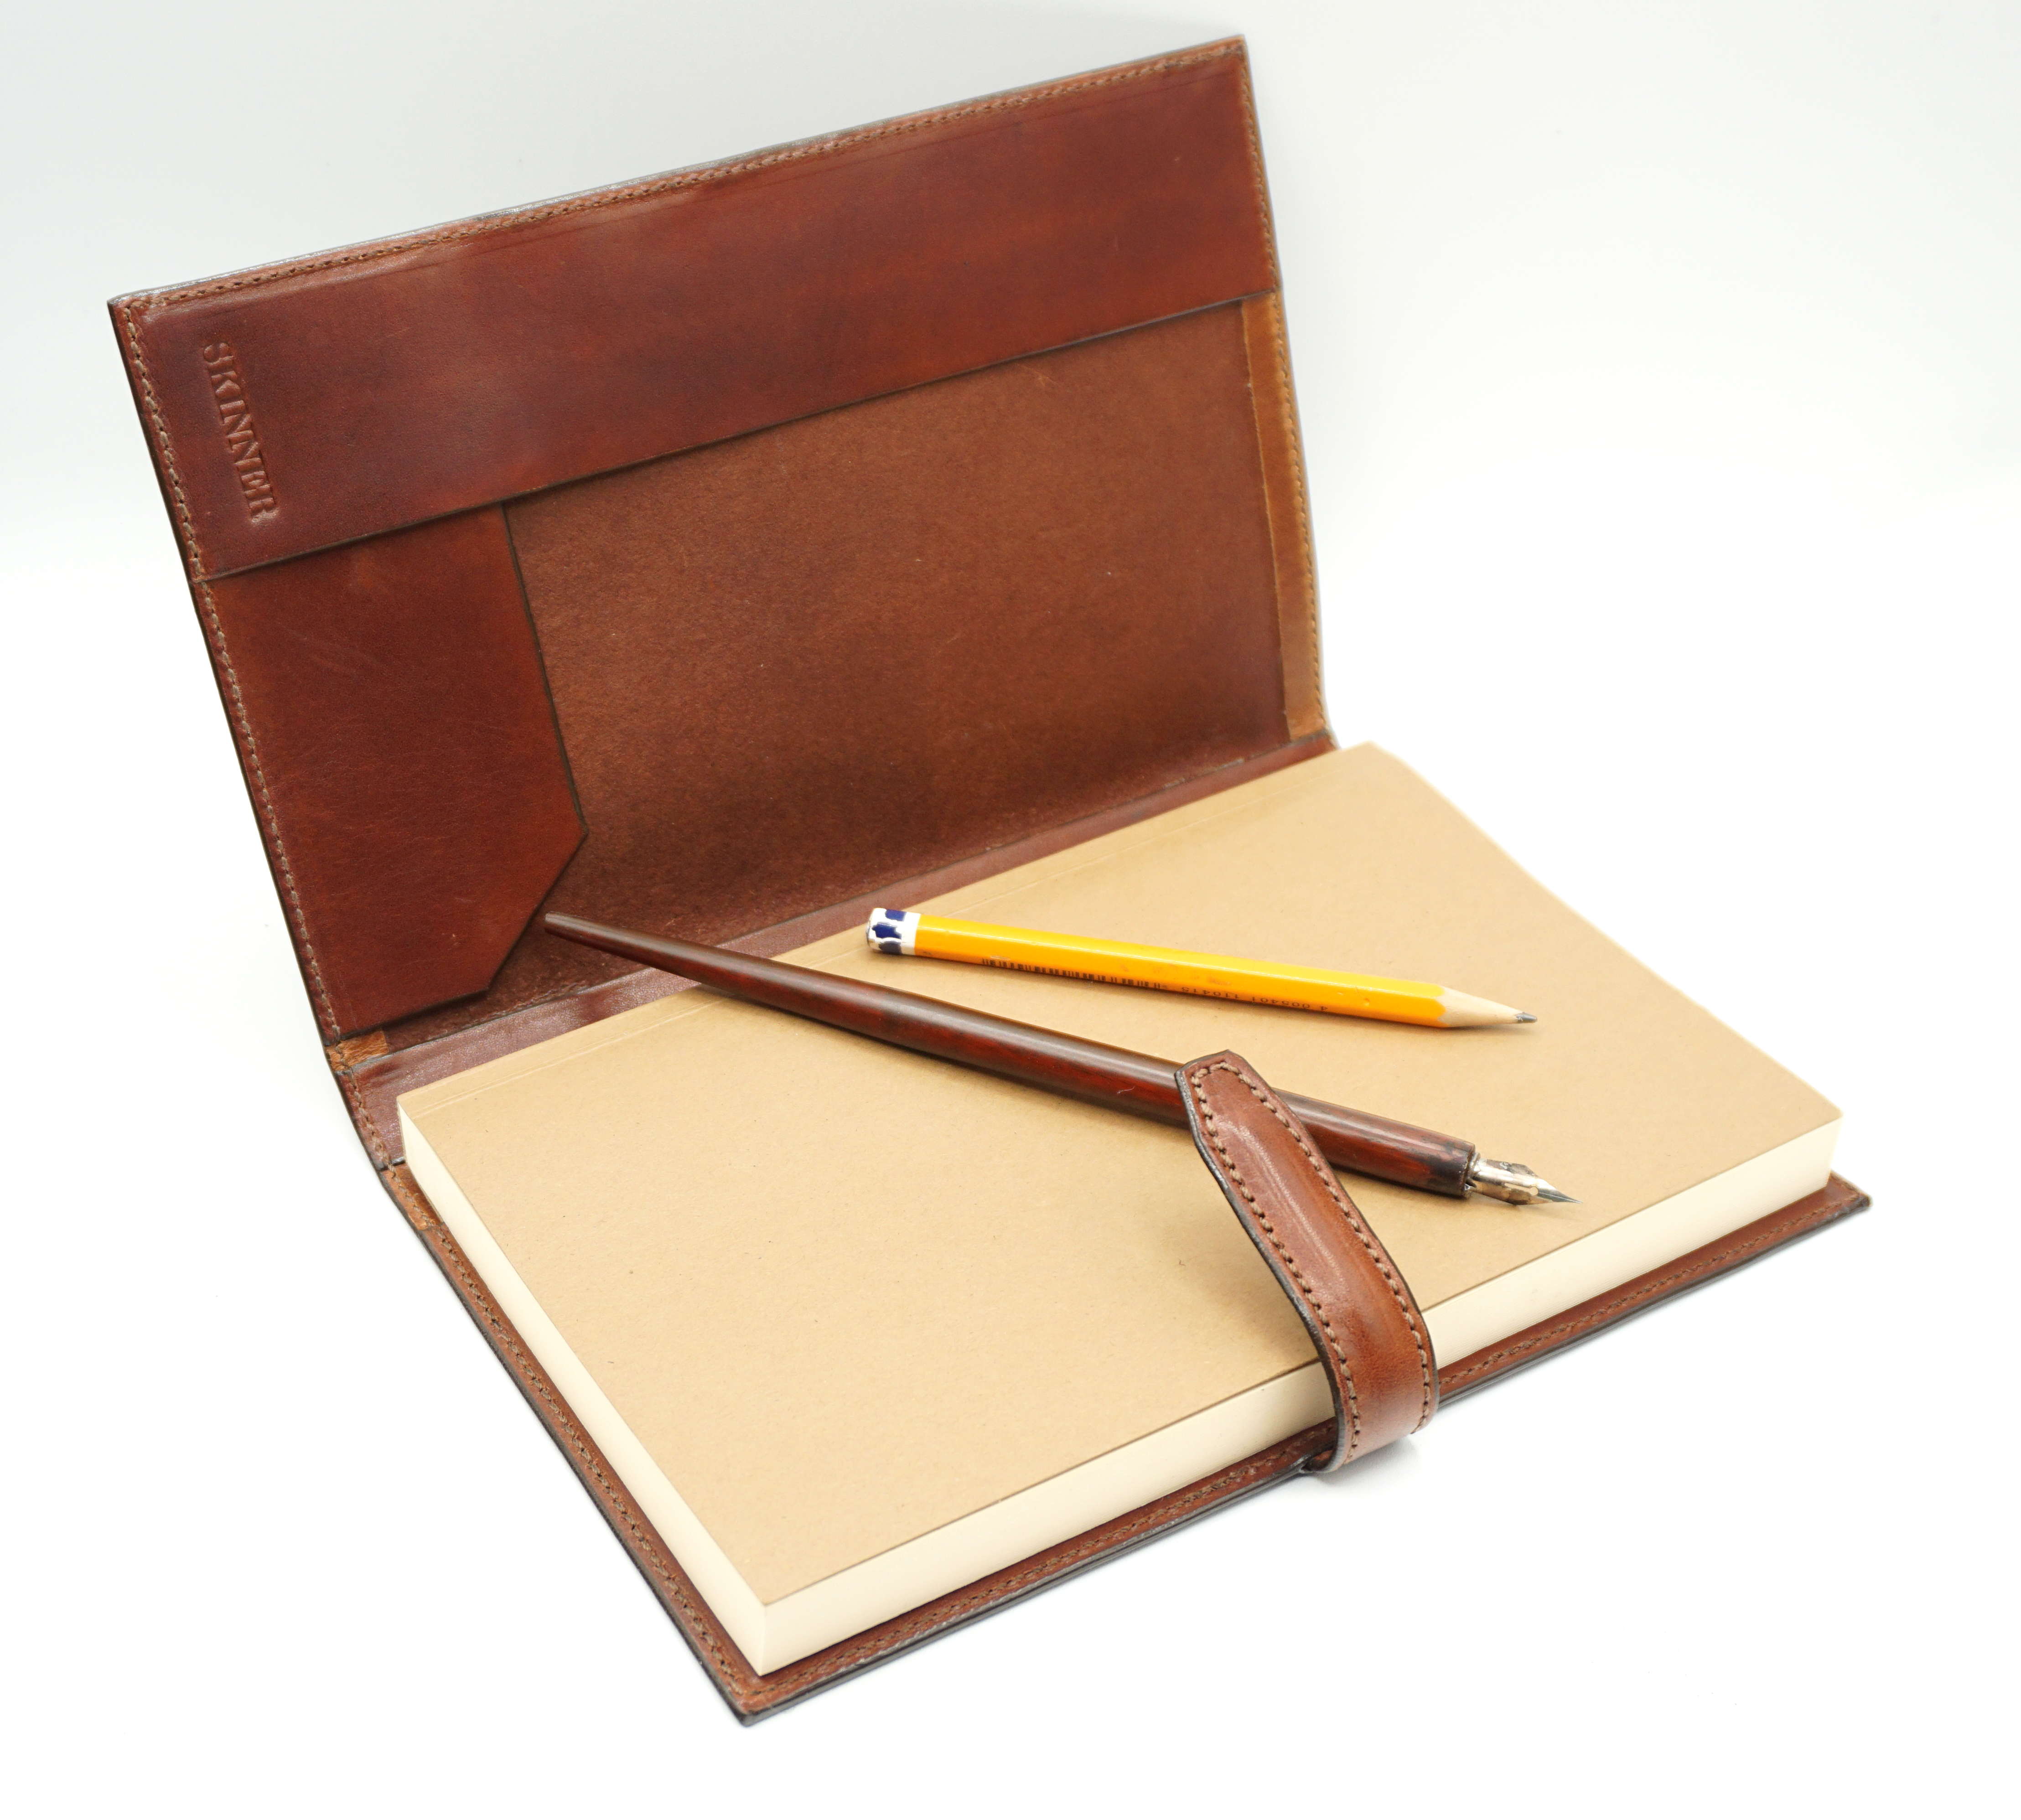 Leather Journal - Type A